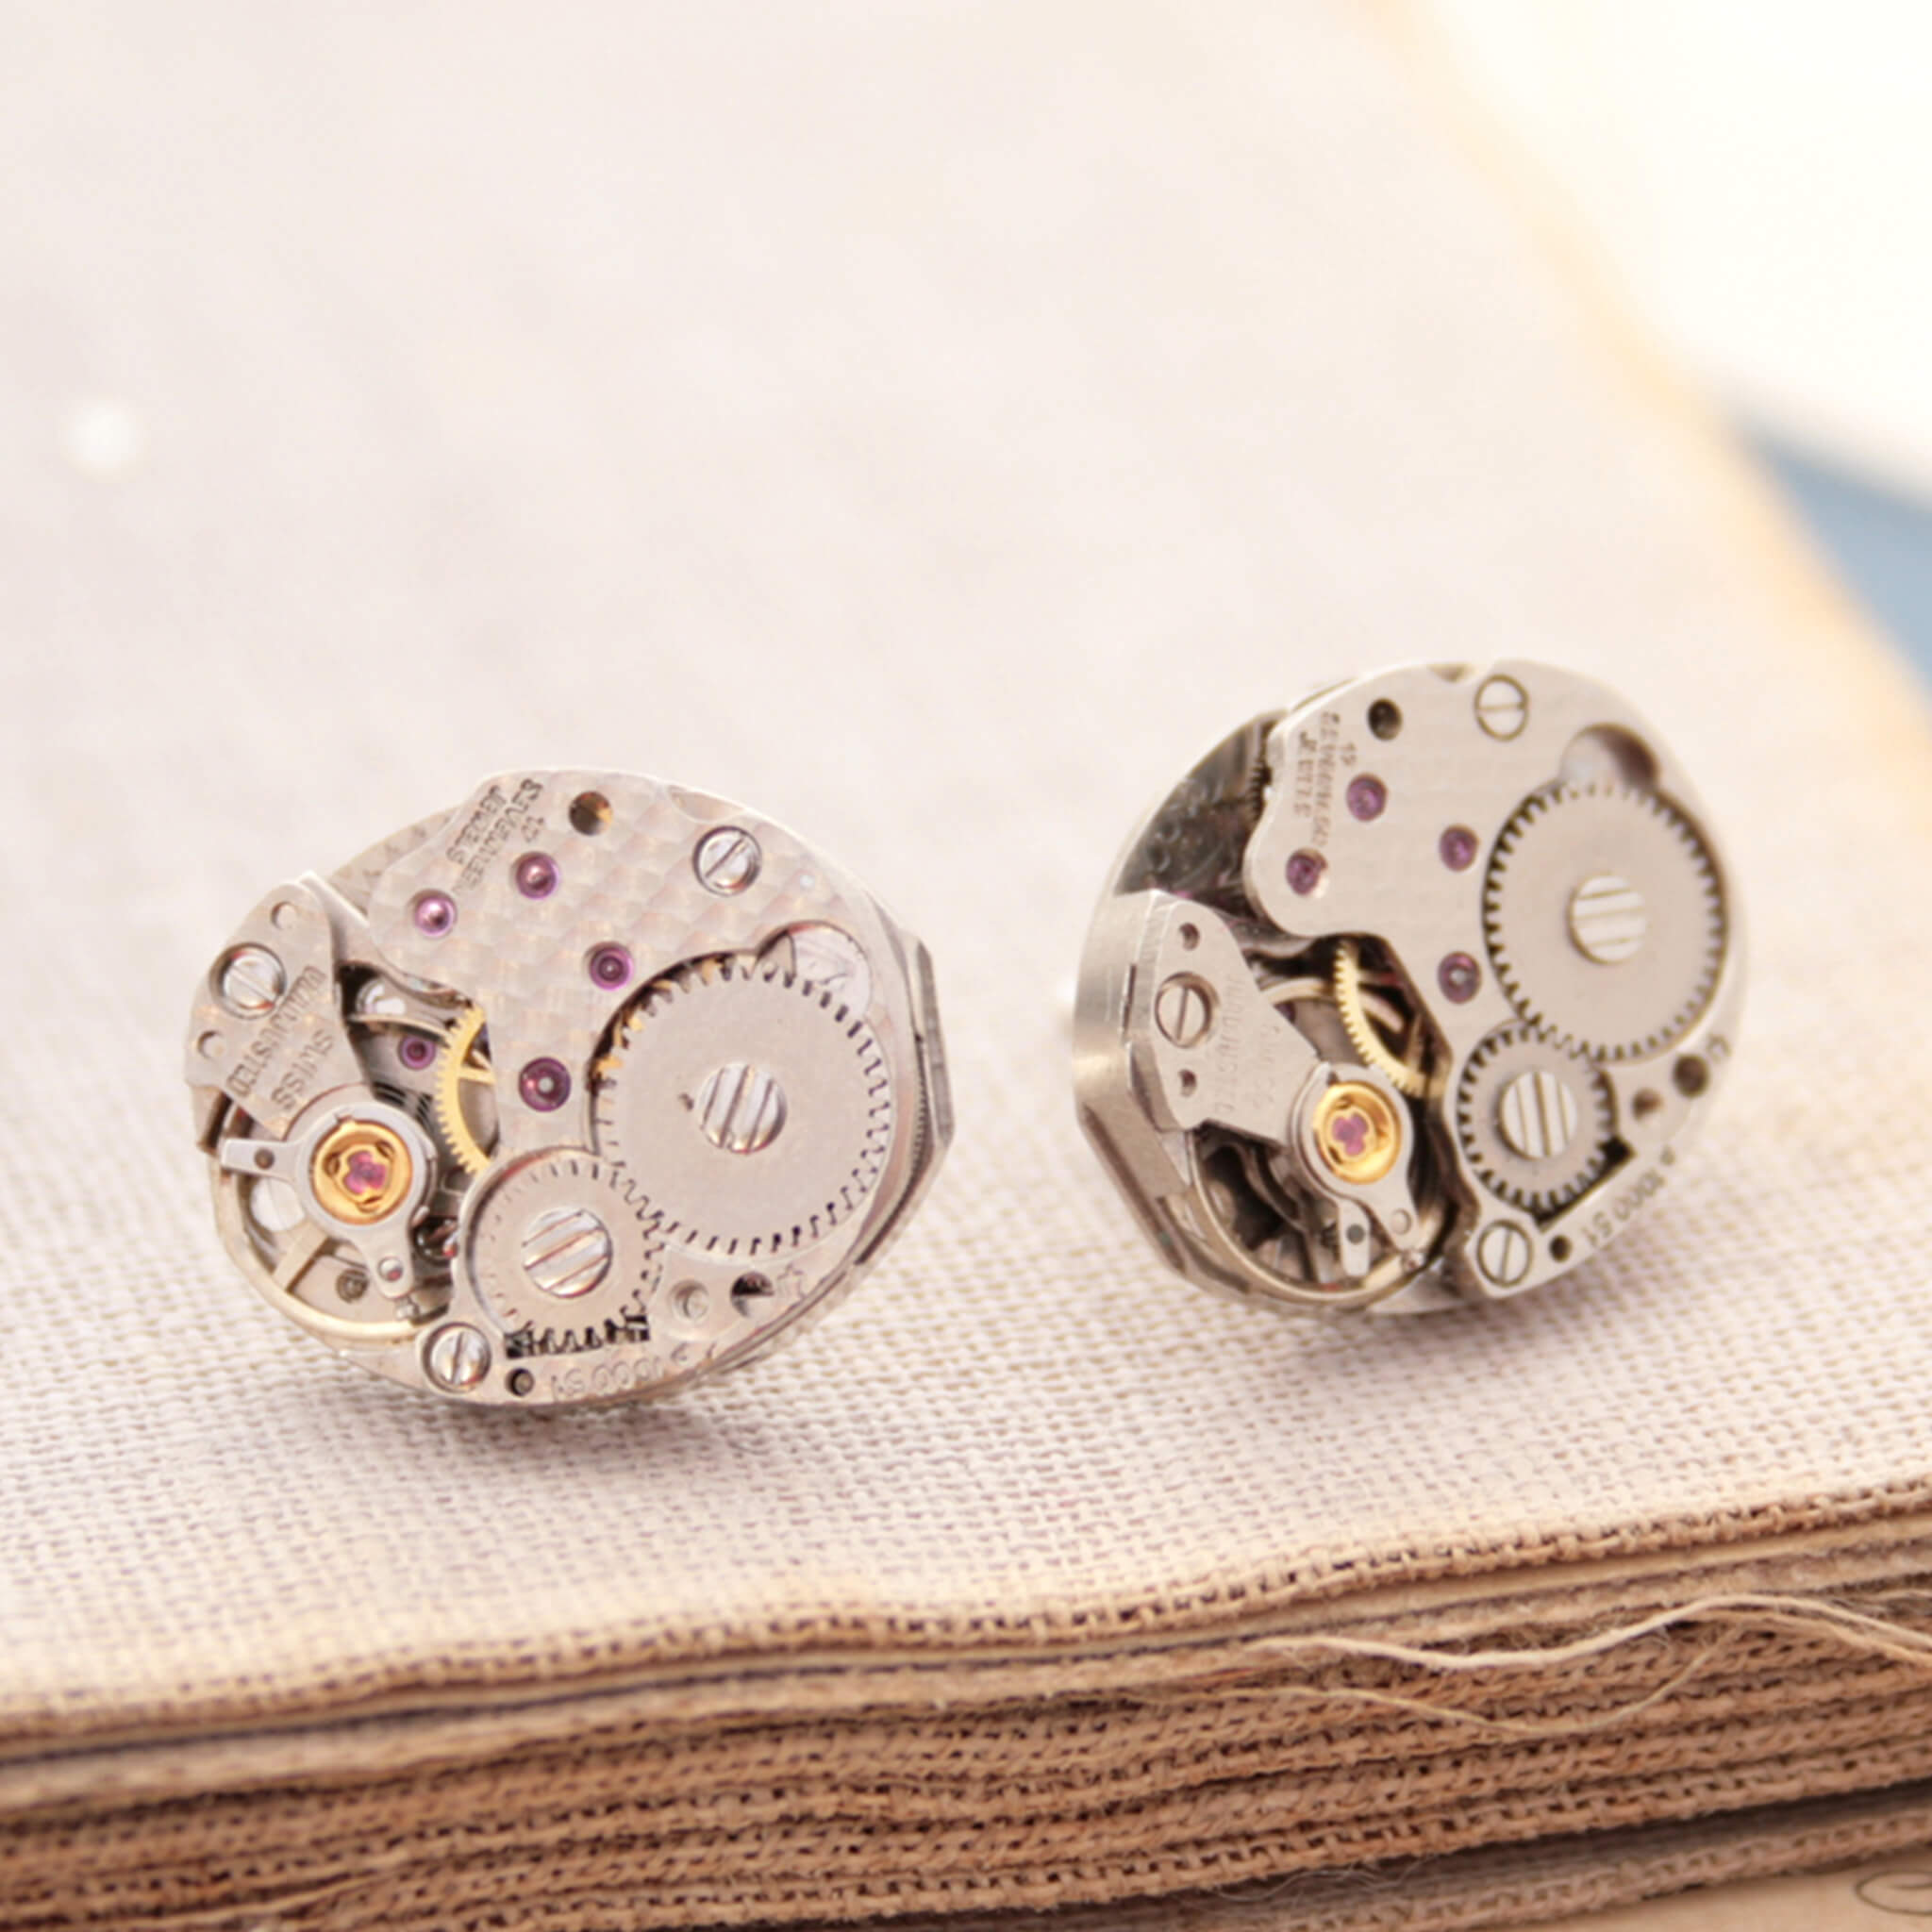 watch movements turned into stud earrings lying on an old book